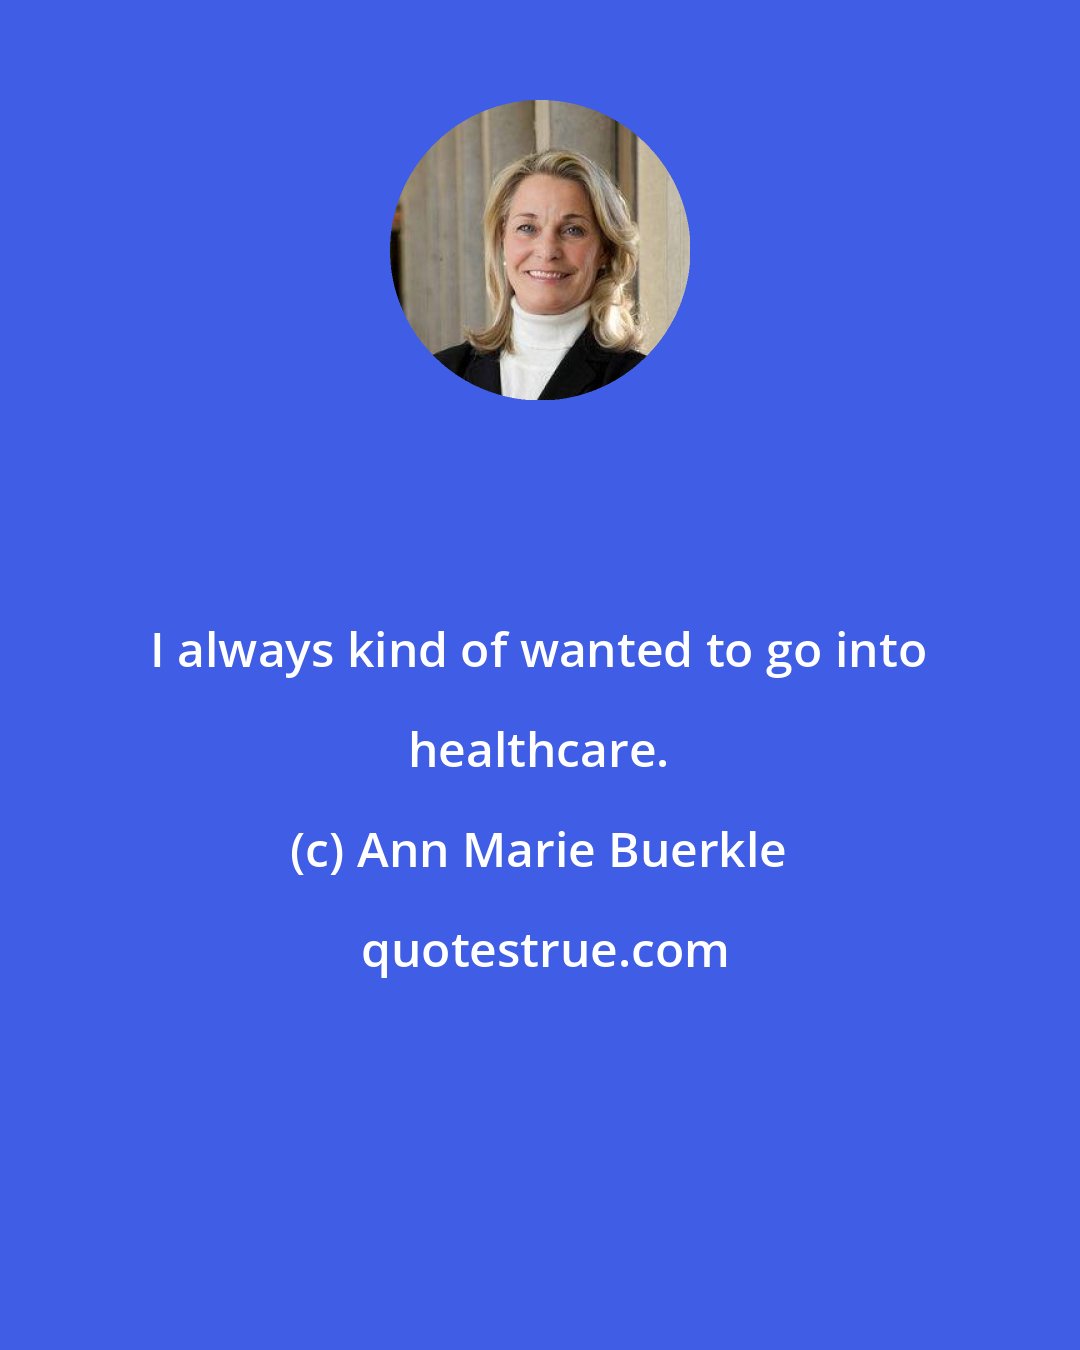 Ann Marie Buerkle: I always kind of wanted to go into healthcare.